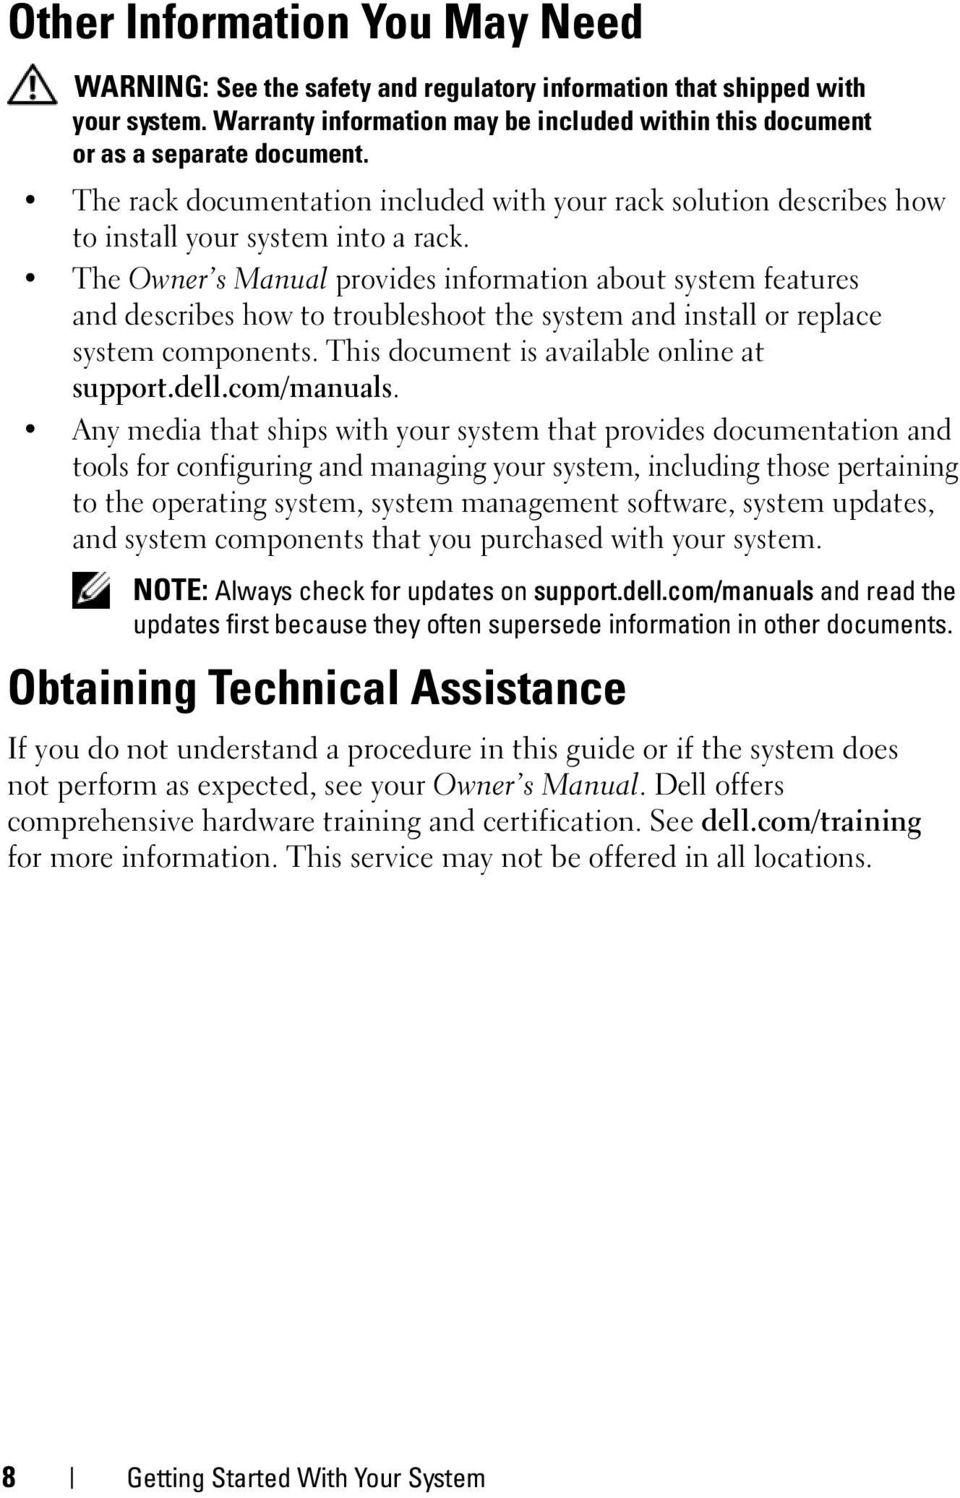 The Owner s Manual provides information about system features and describes how to troubleshoot the system and install or replace system components. This document is available online at support.dell.